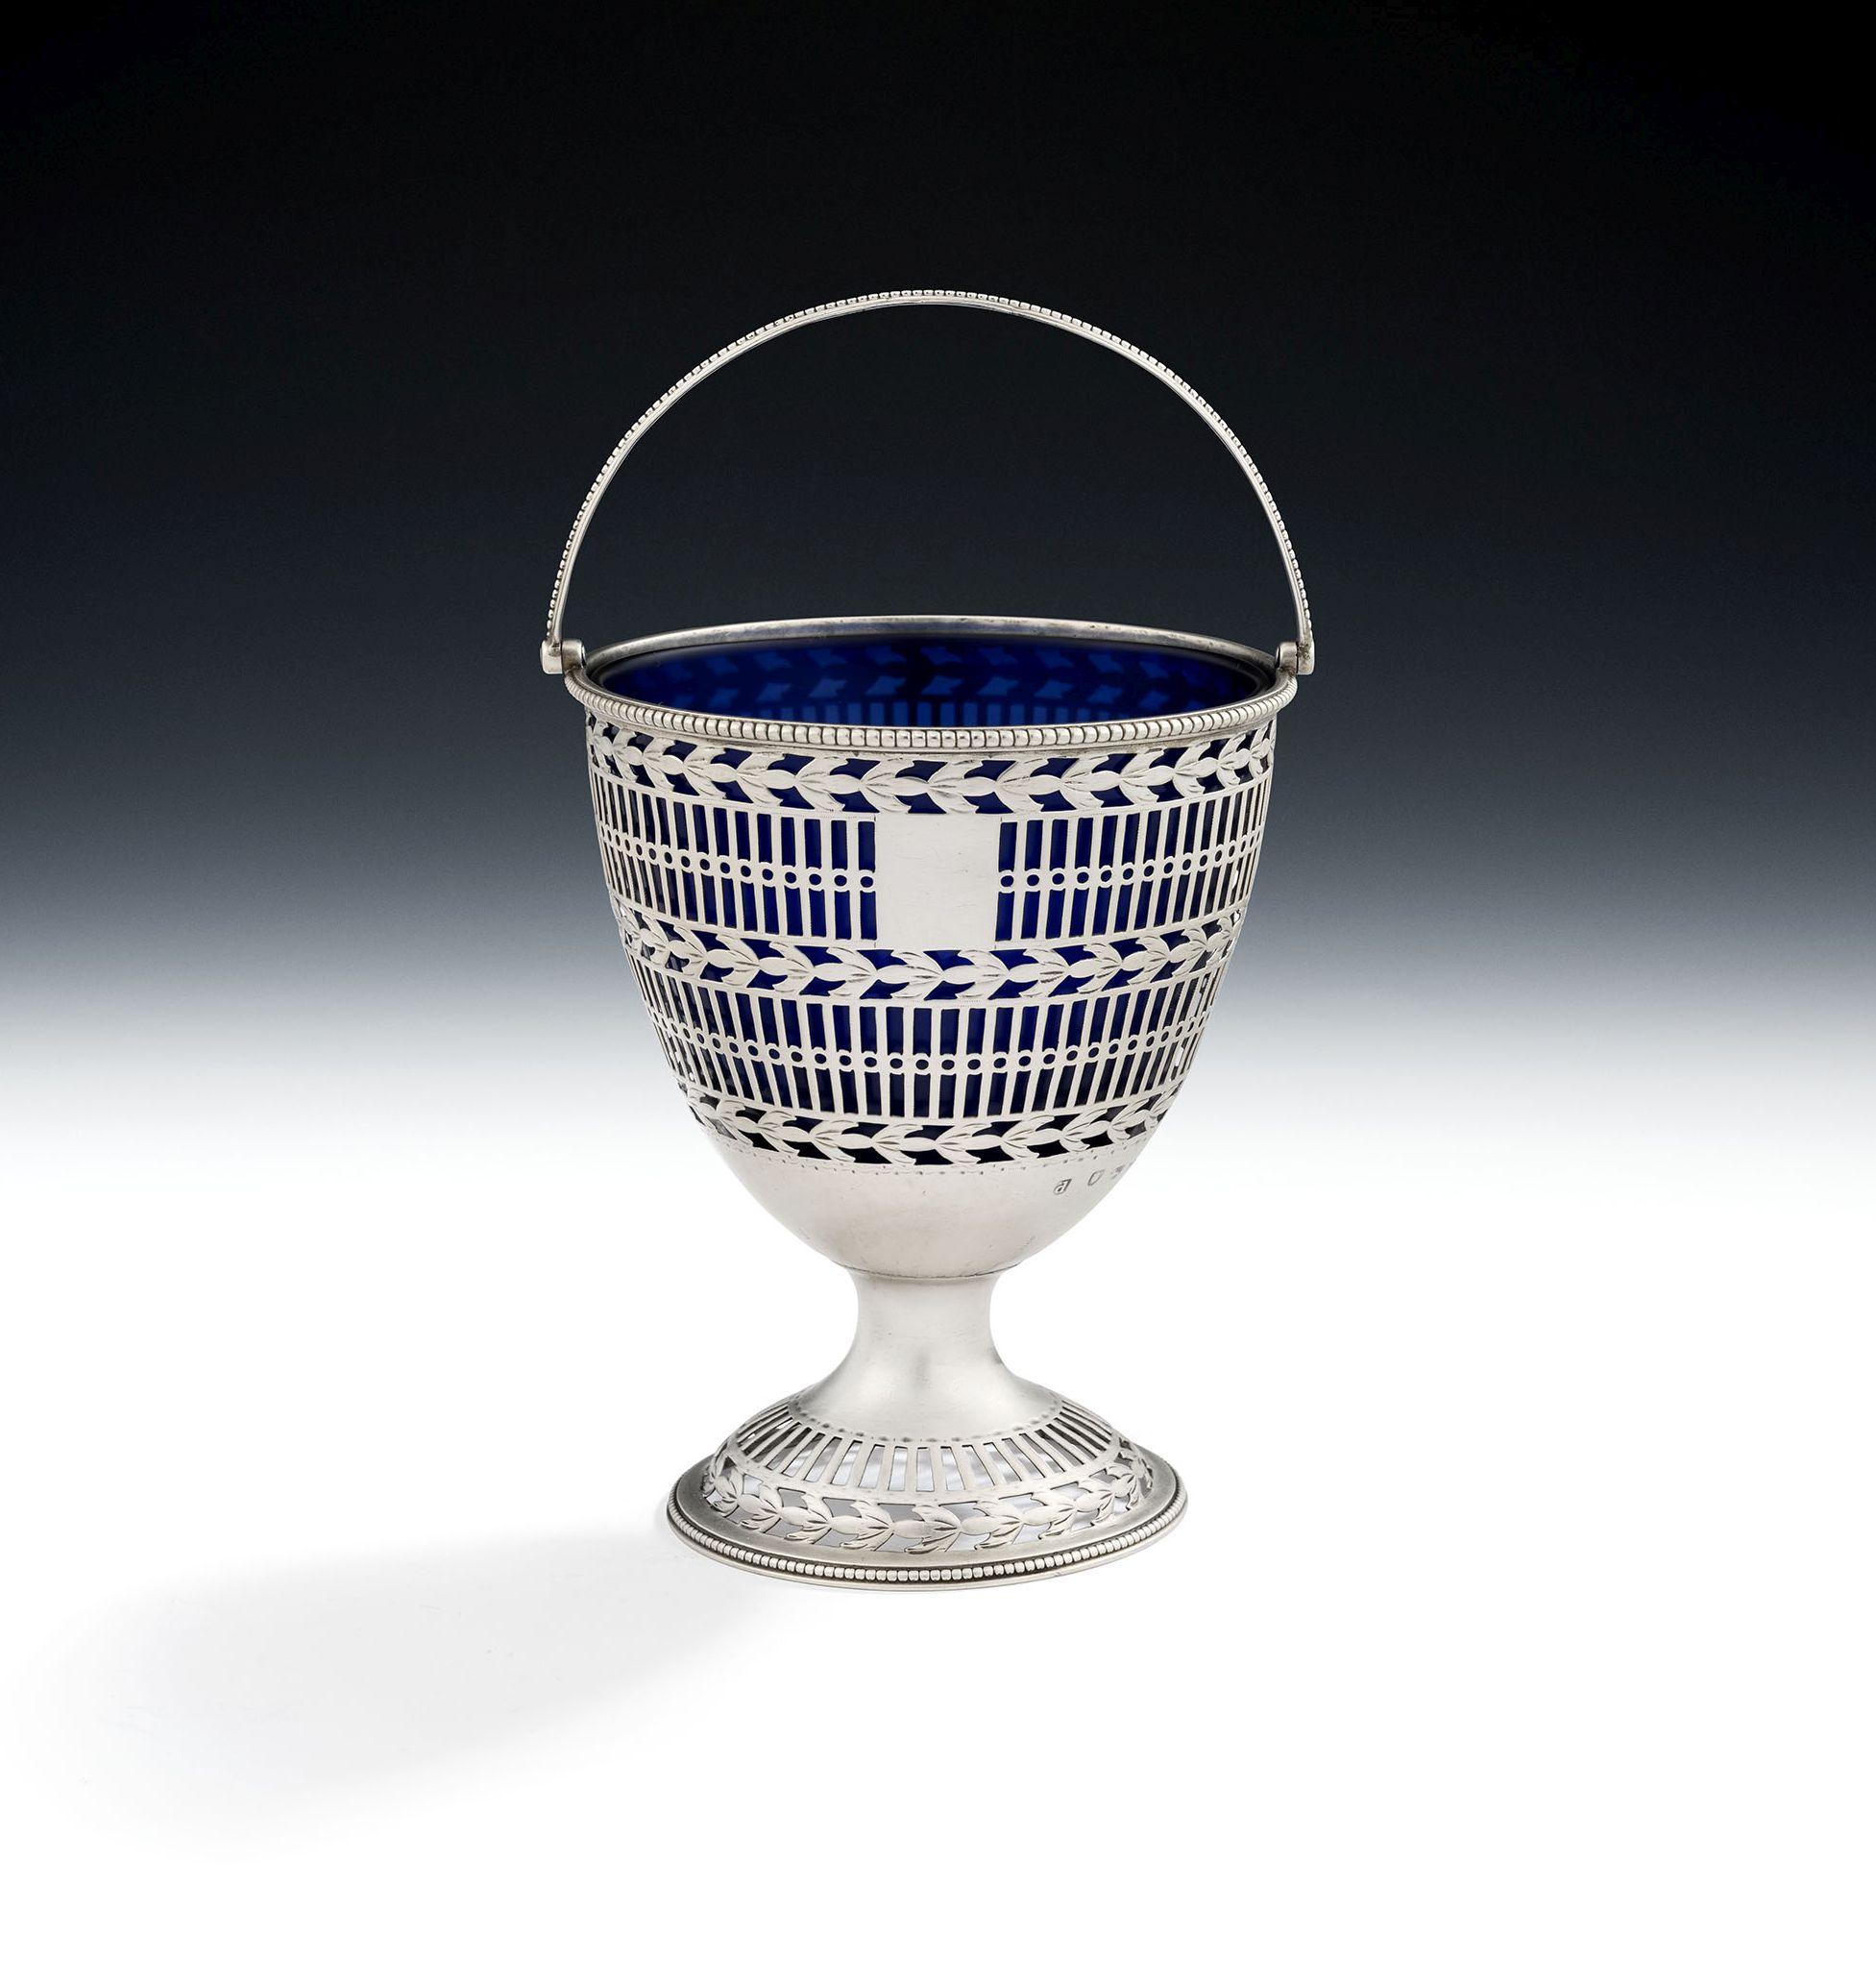 A very fine George III Neo Classical Sugar Basket made in London in 1779 by Hester Bateman.

The Sugar Basket stands on a circular domed foot, with beaded edge, which is pierced with vertical pails and blue bell drops.  The main body is modelled in